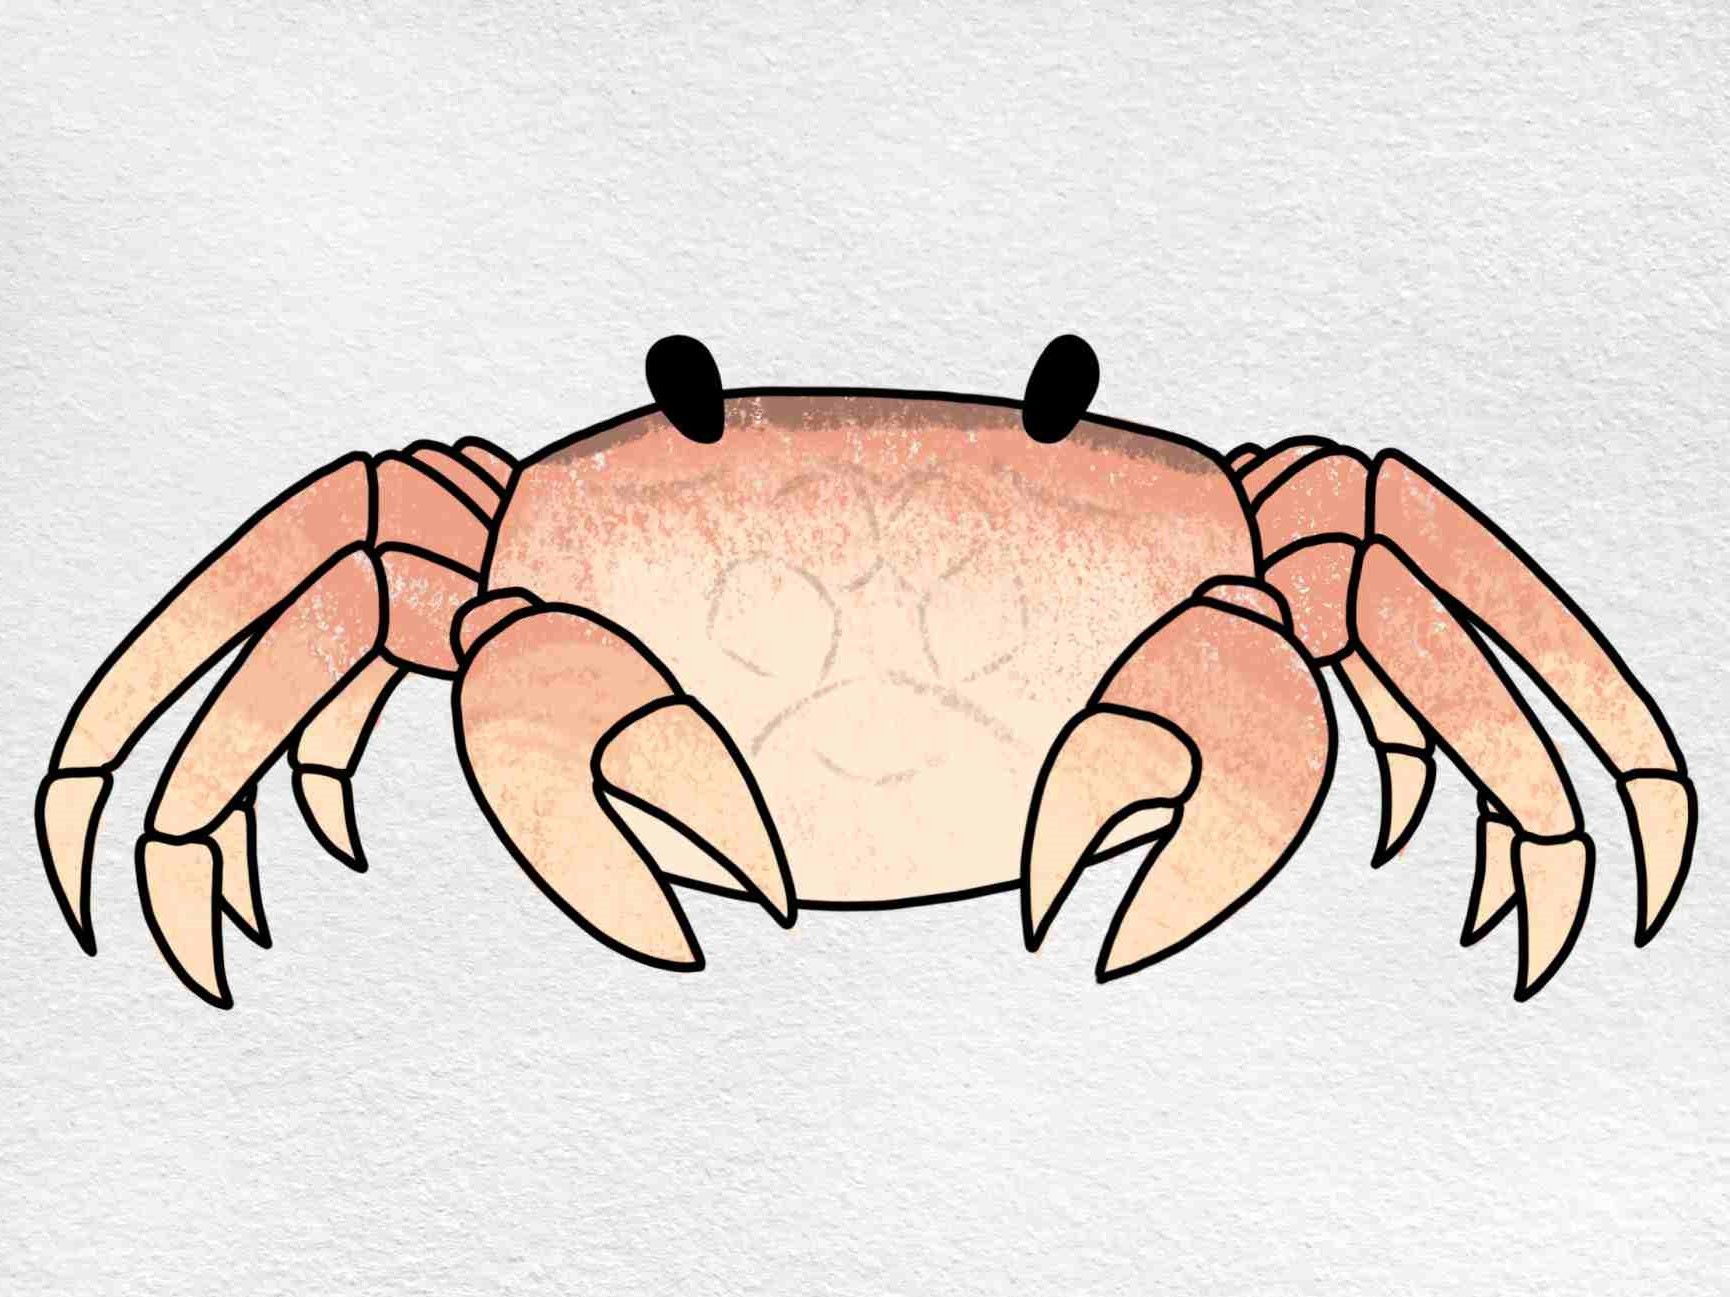 How To Draw A Crab For Beginners